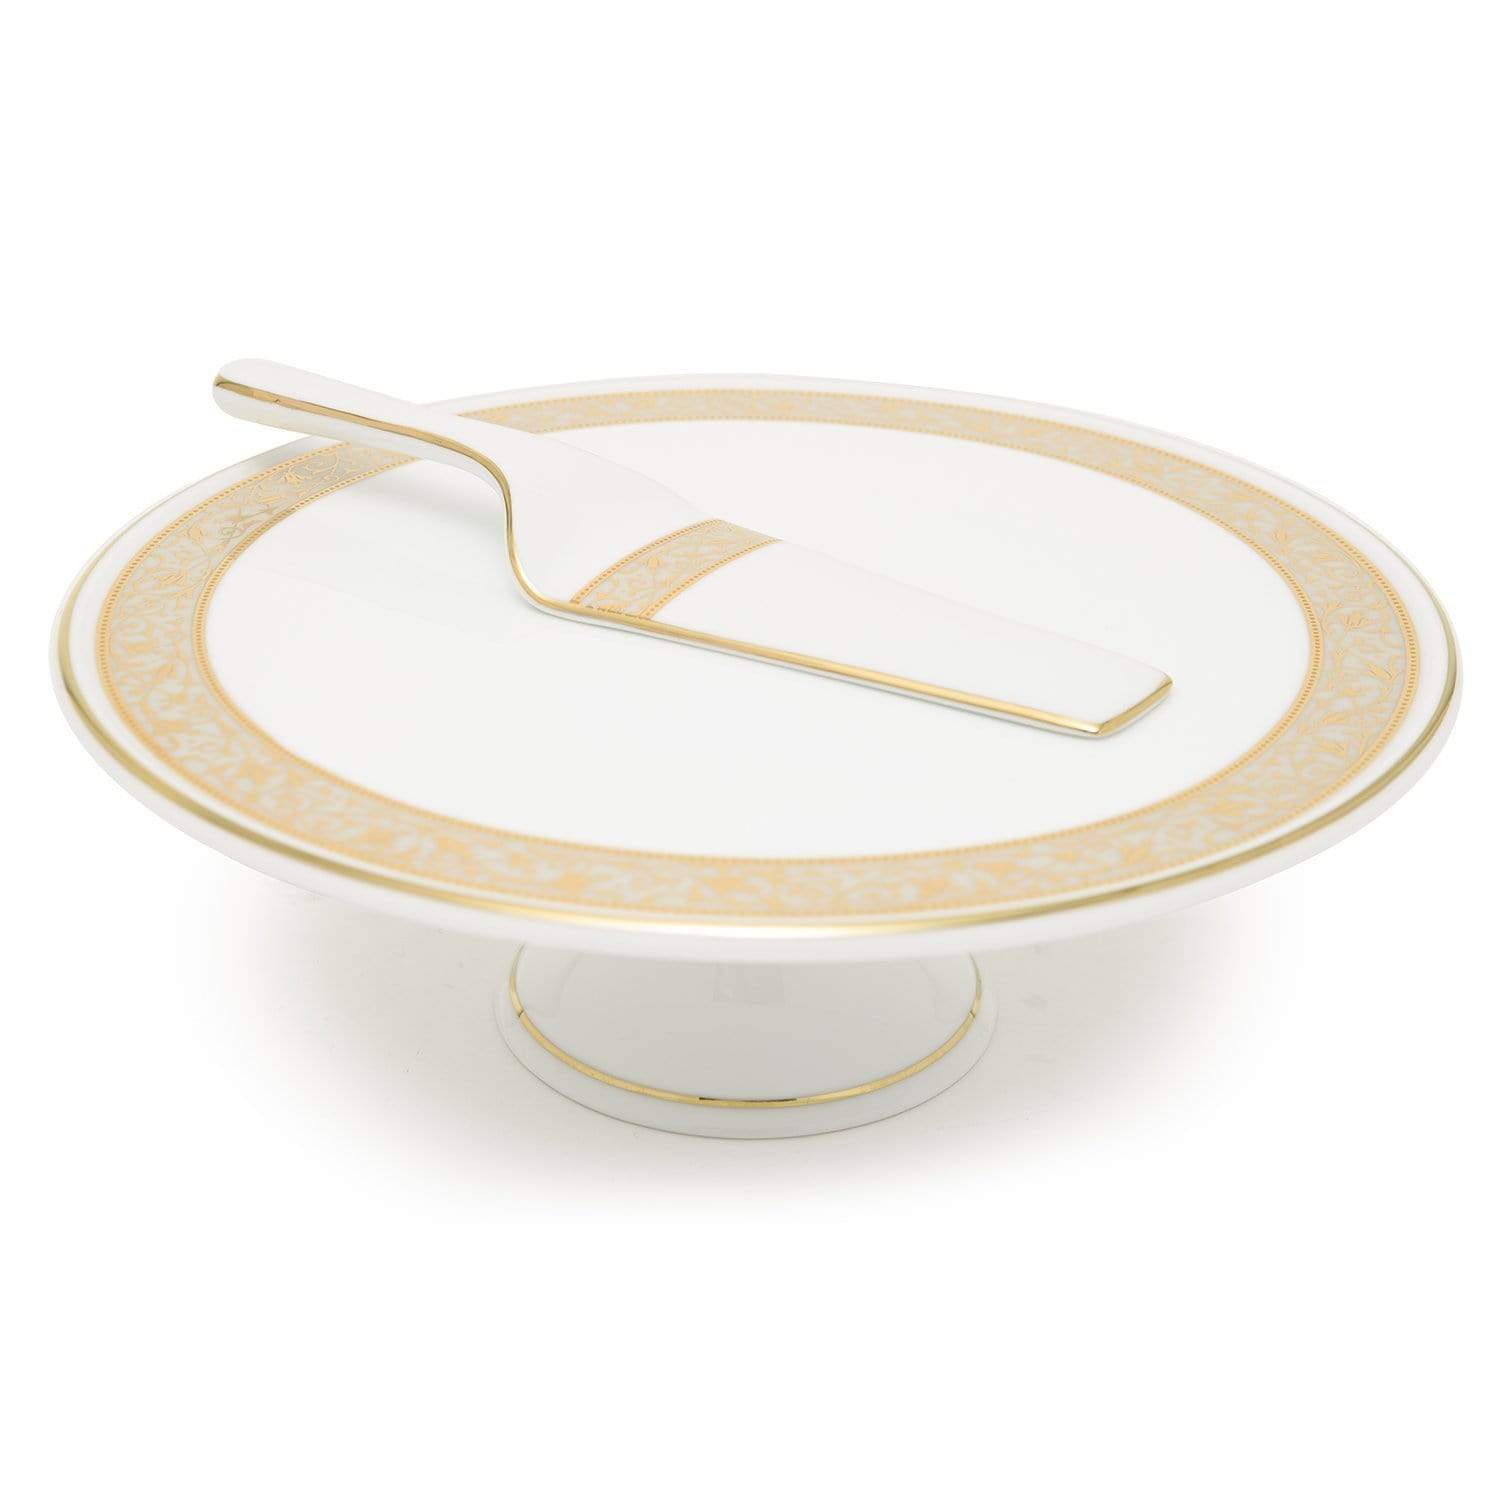 Dankotuwa Porcelain Catherina 1 Tier Cake Stand with Serving - Gold - CATH-904/121/548 - Jashanmal Home